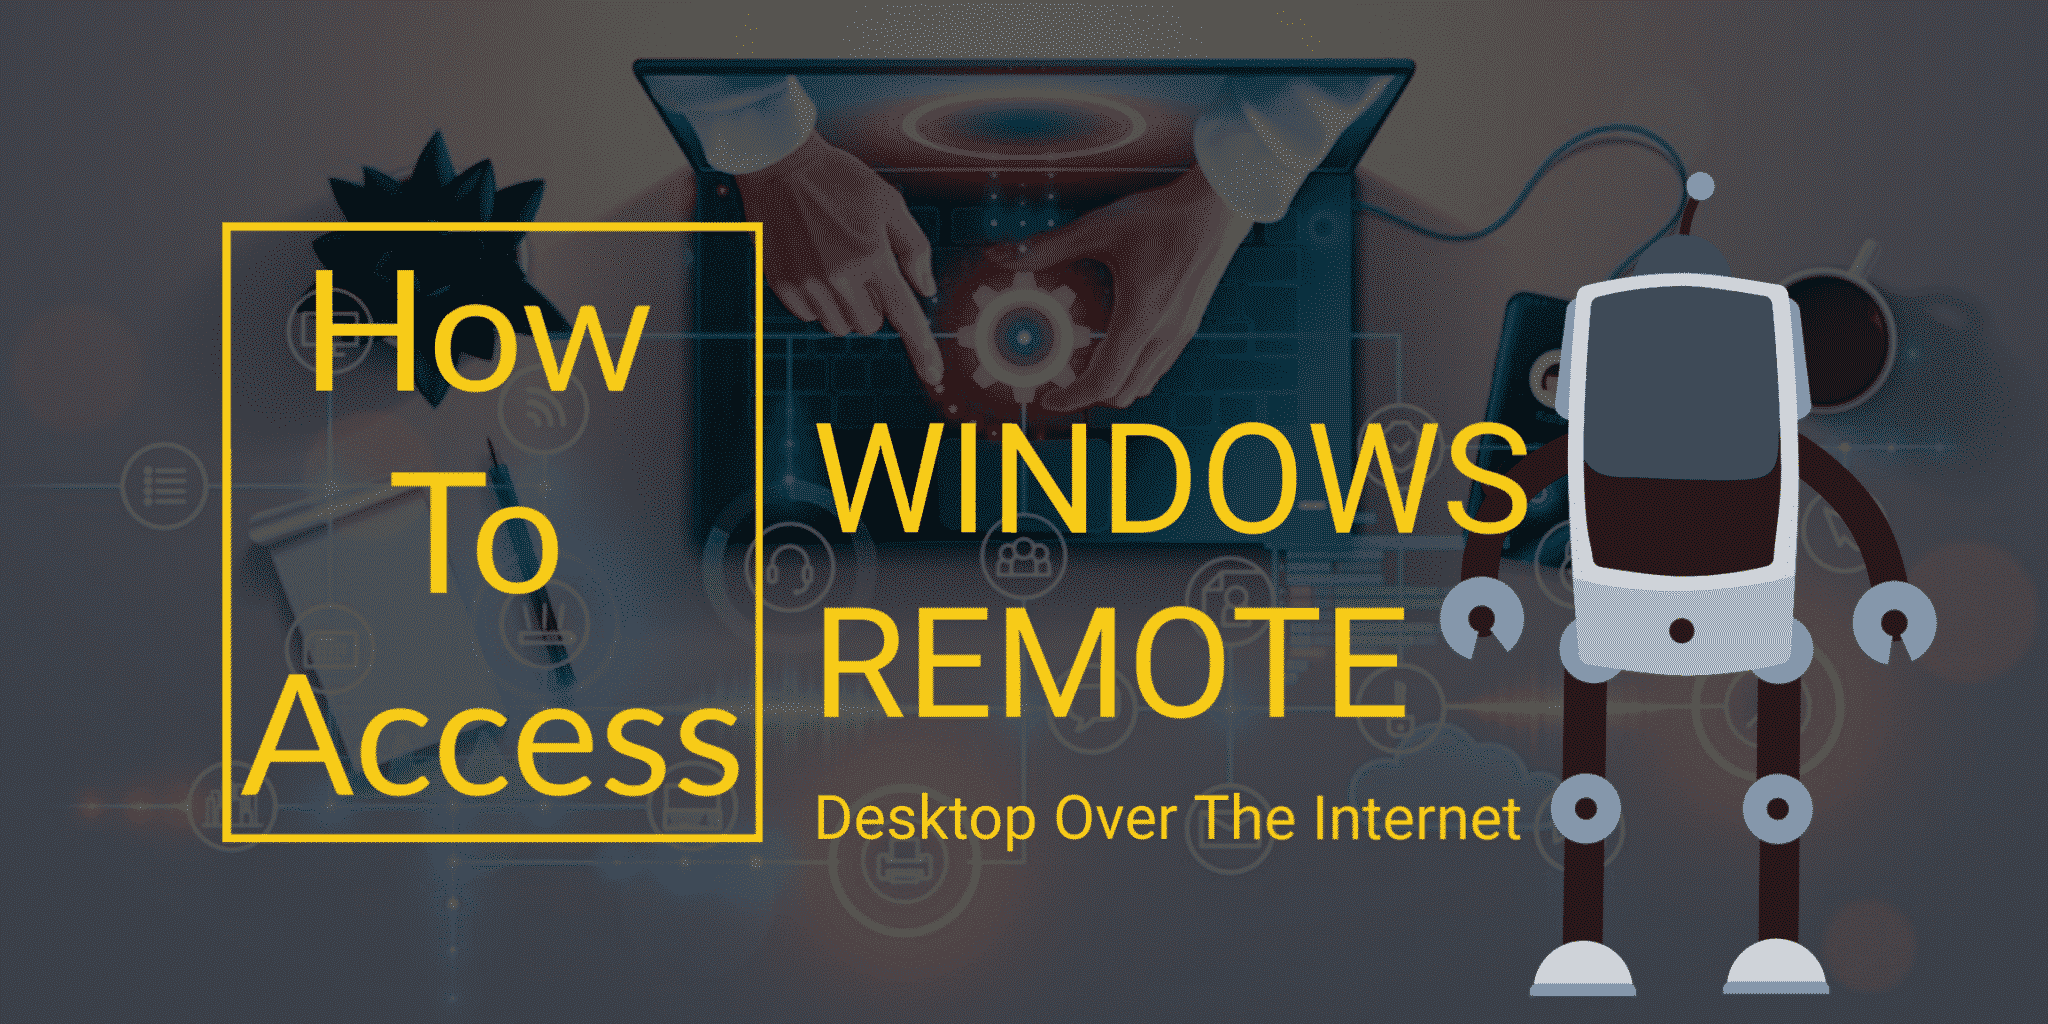 How to Access Windows Remote Desktop Over the Internet